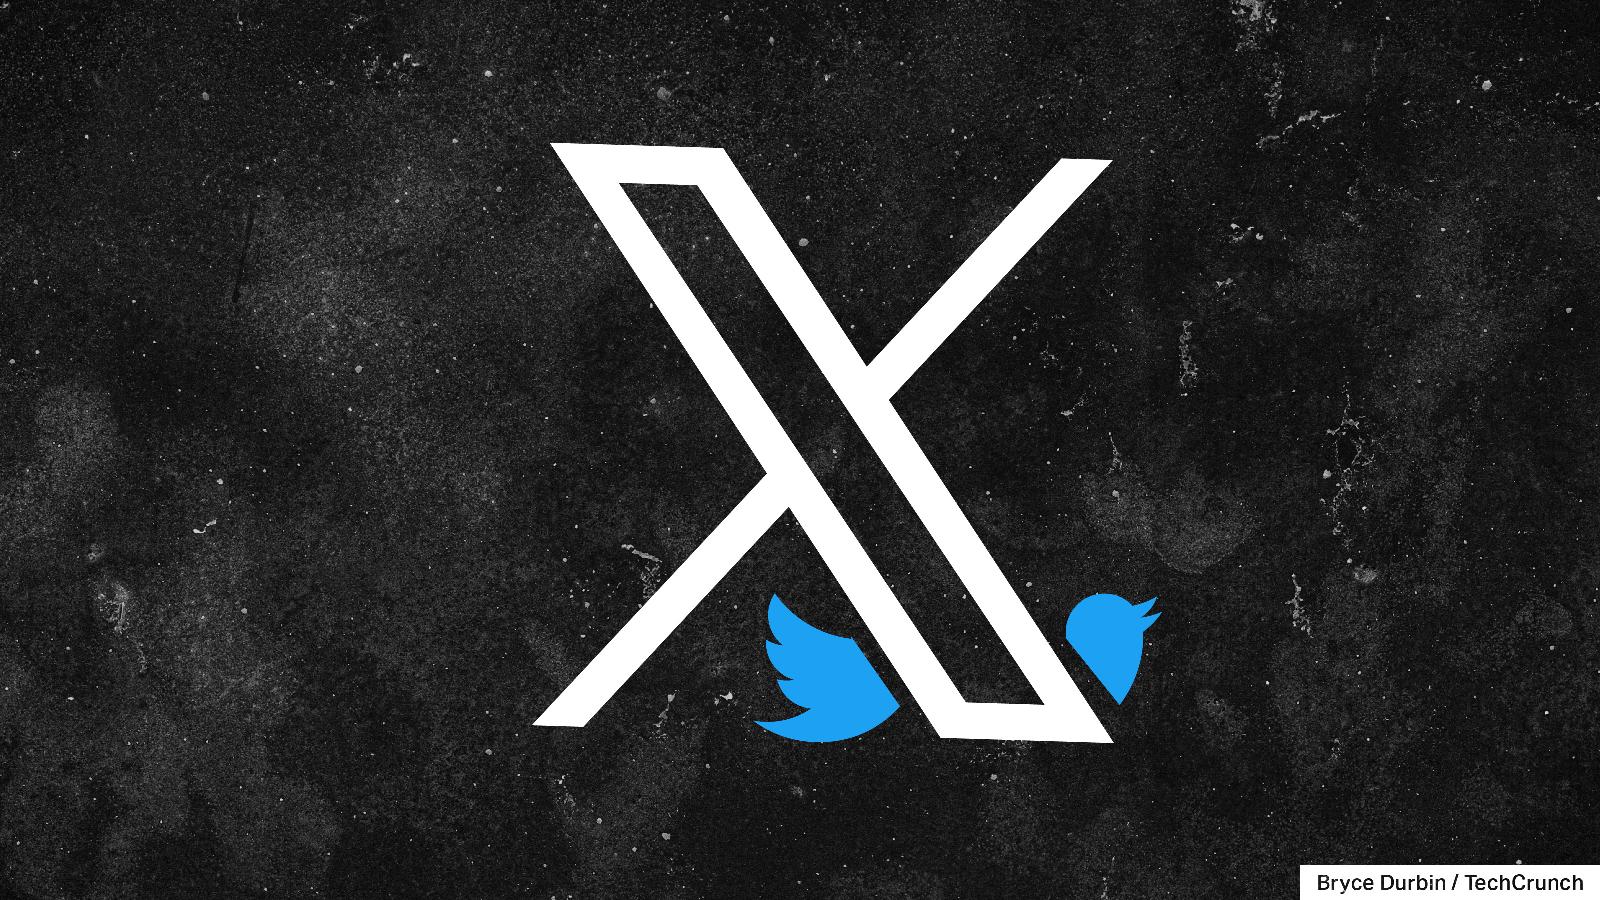 X (formerly Twitter) makes X Pro (formerly TweetDeck) a subscriber-only product